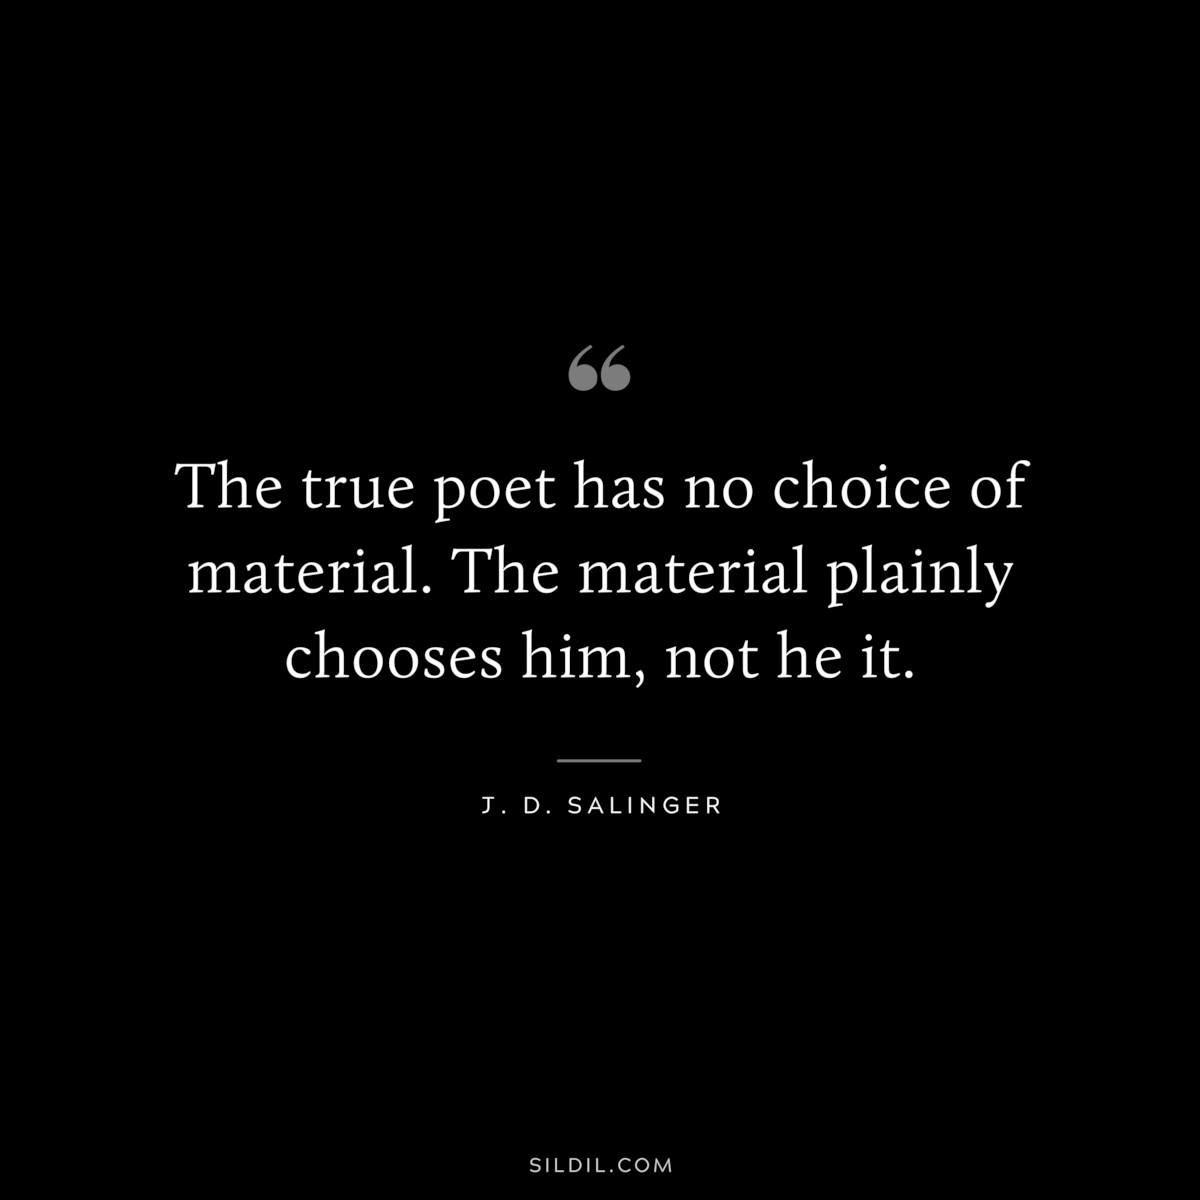 The true poet has no choice of material. The material plainly chooses him, not he it. — J. D. Salinger